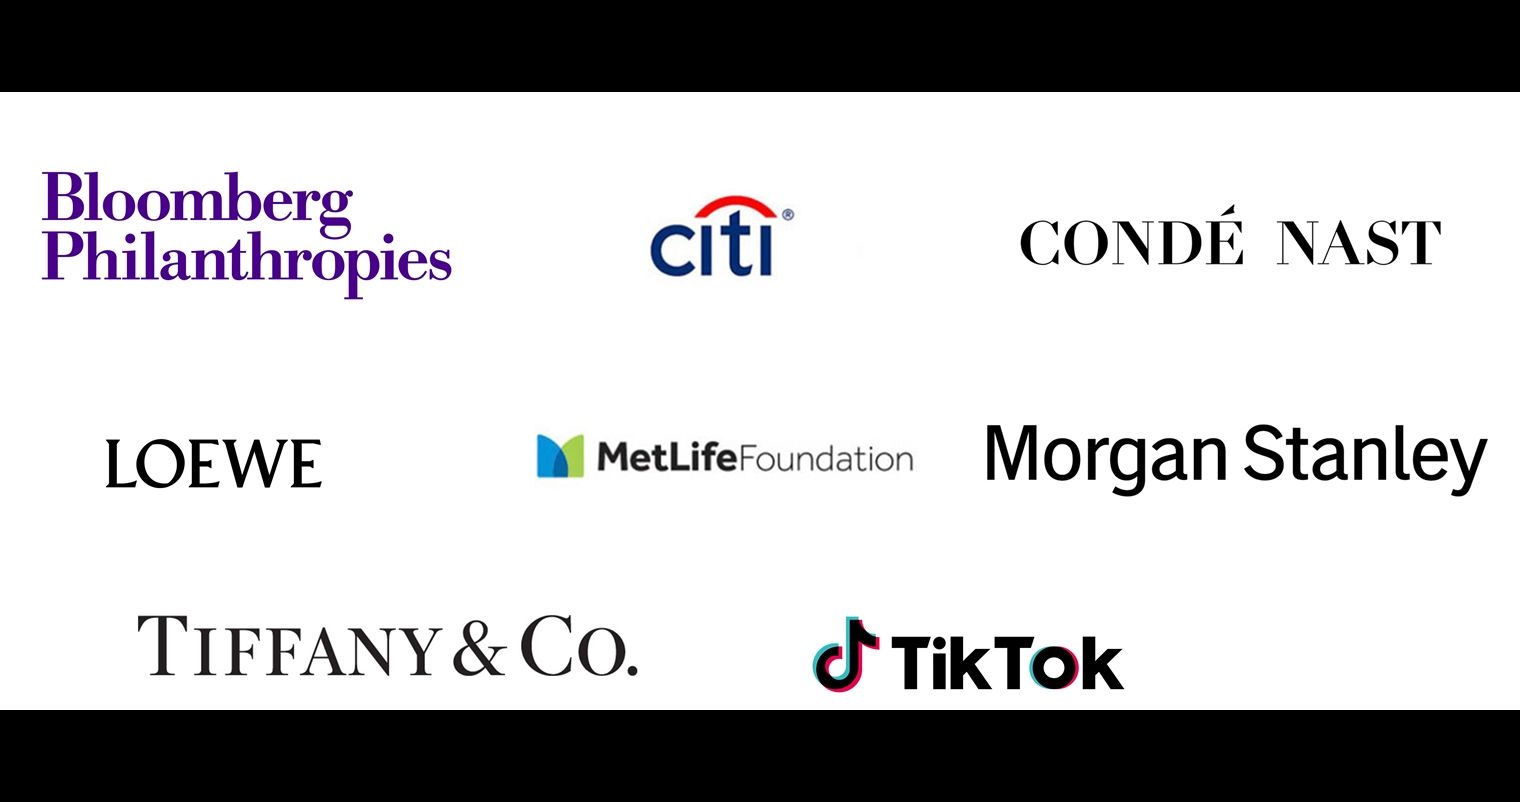 "Logos of corporate sponsors such as Bank of America, Bloomberg Philanthropies, Citi, Conde Nast, Louis Vuitton, MetLife Foundation, Morgan Stanley, and Reliance Foundation."